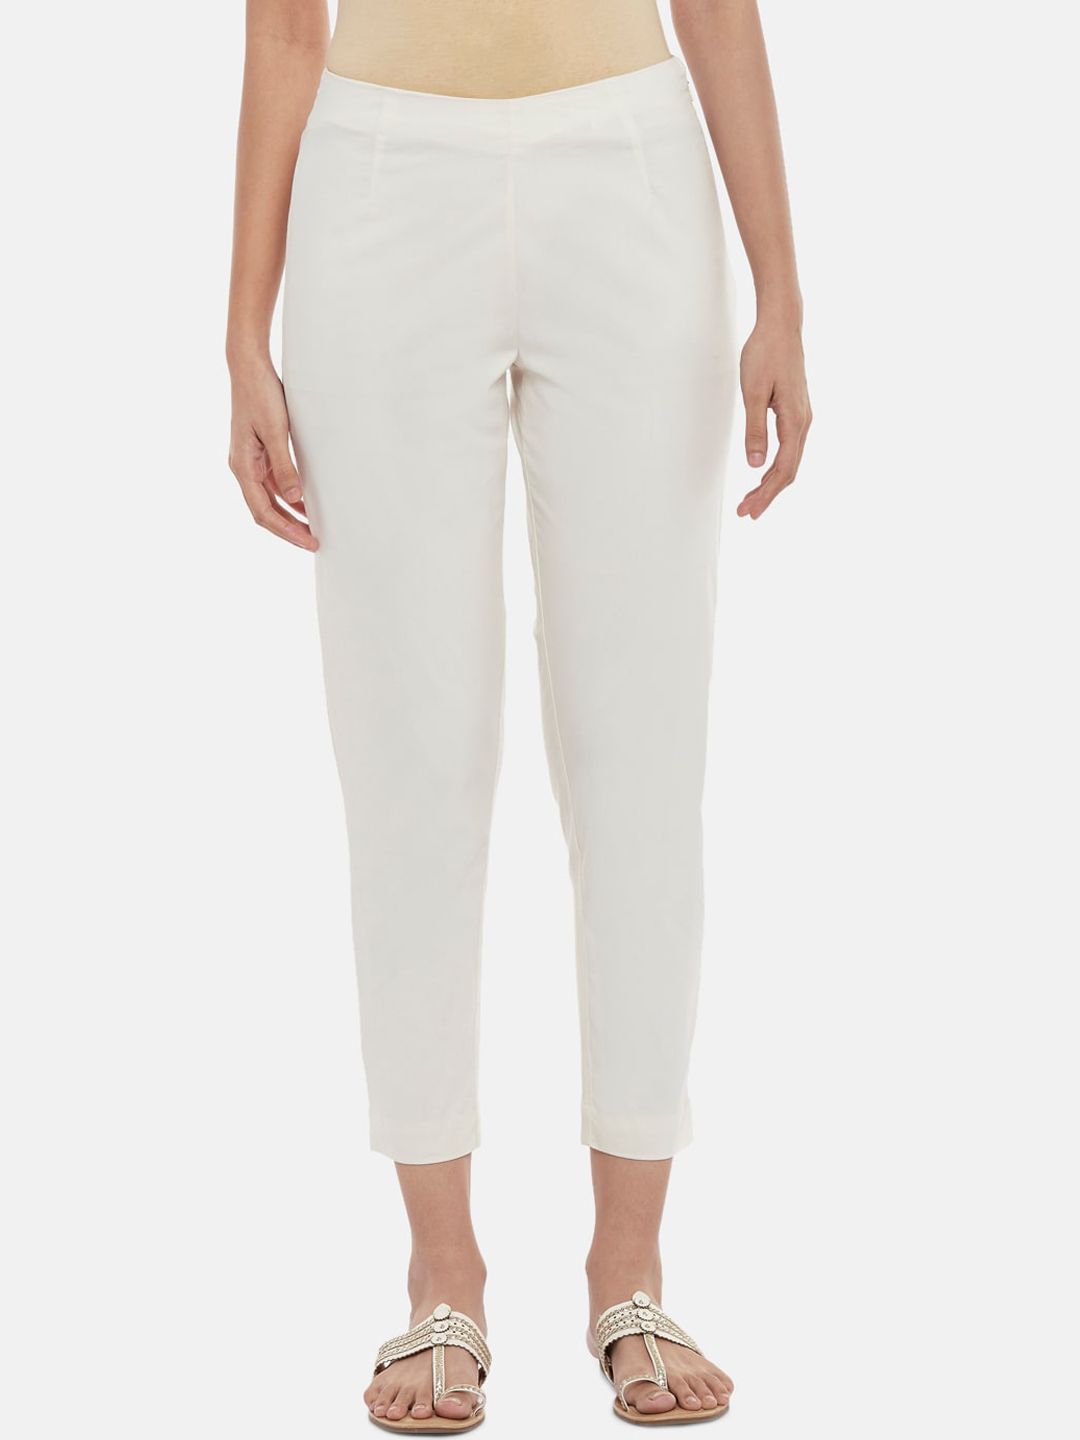 RANGMANCH BY PANTALOONS Women Off White Trousers Price in India